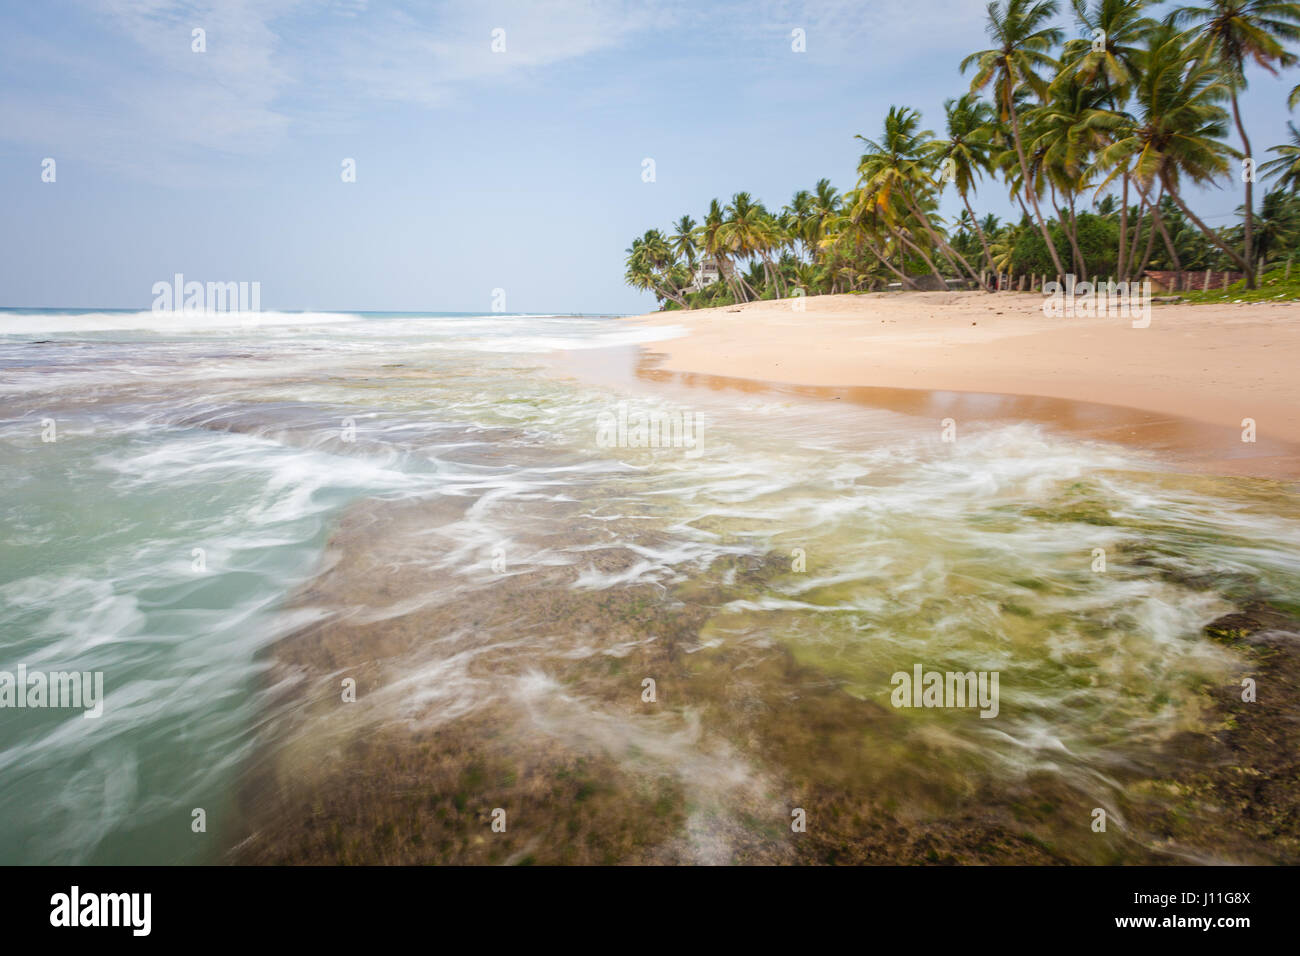 Great and beautiful place in paradise. Indian ocean with golden sand and palms in Sri Lanka. A wonderful nature landscape of a beach scene in Sri Lank Stock Photo